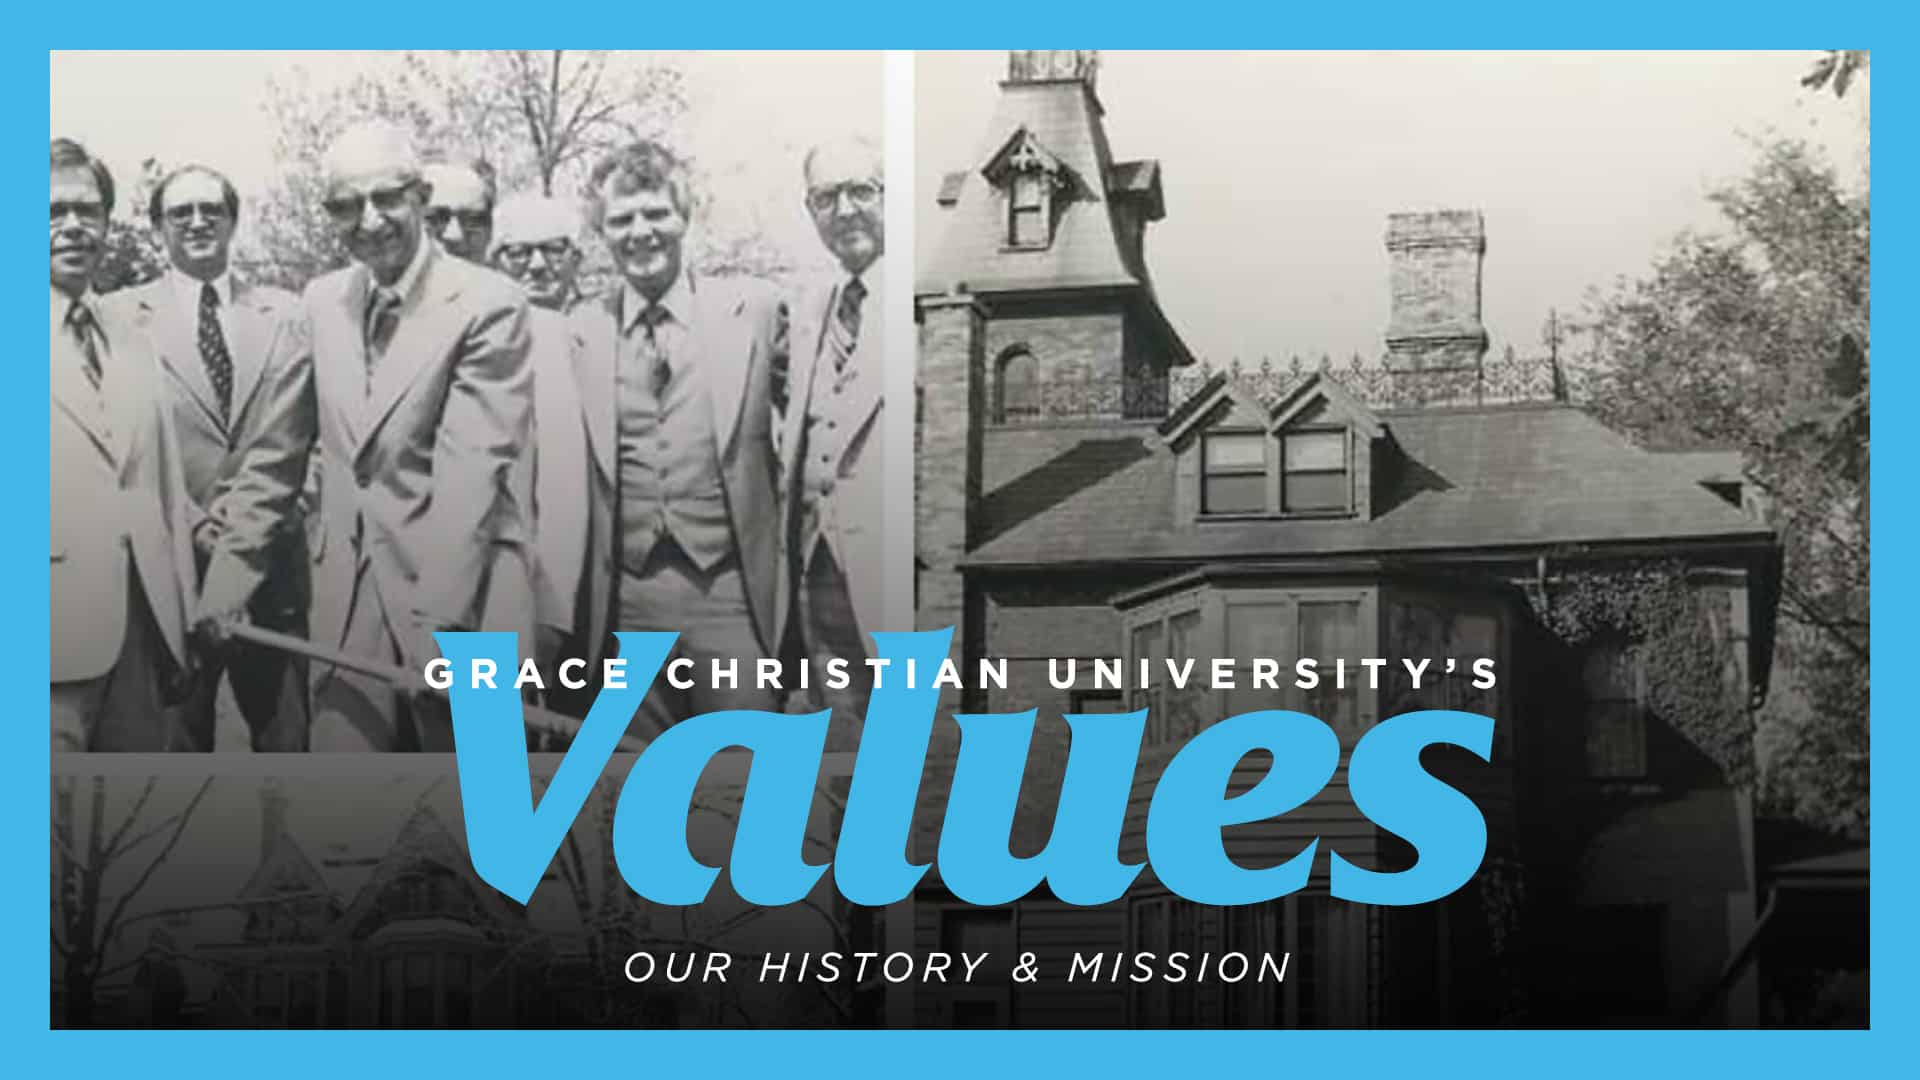 Grace Christian University's Values - Our History and Mission